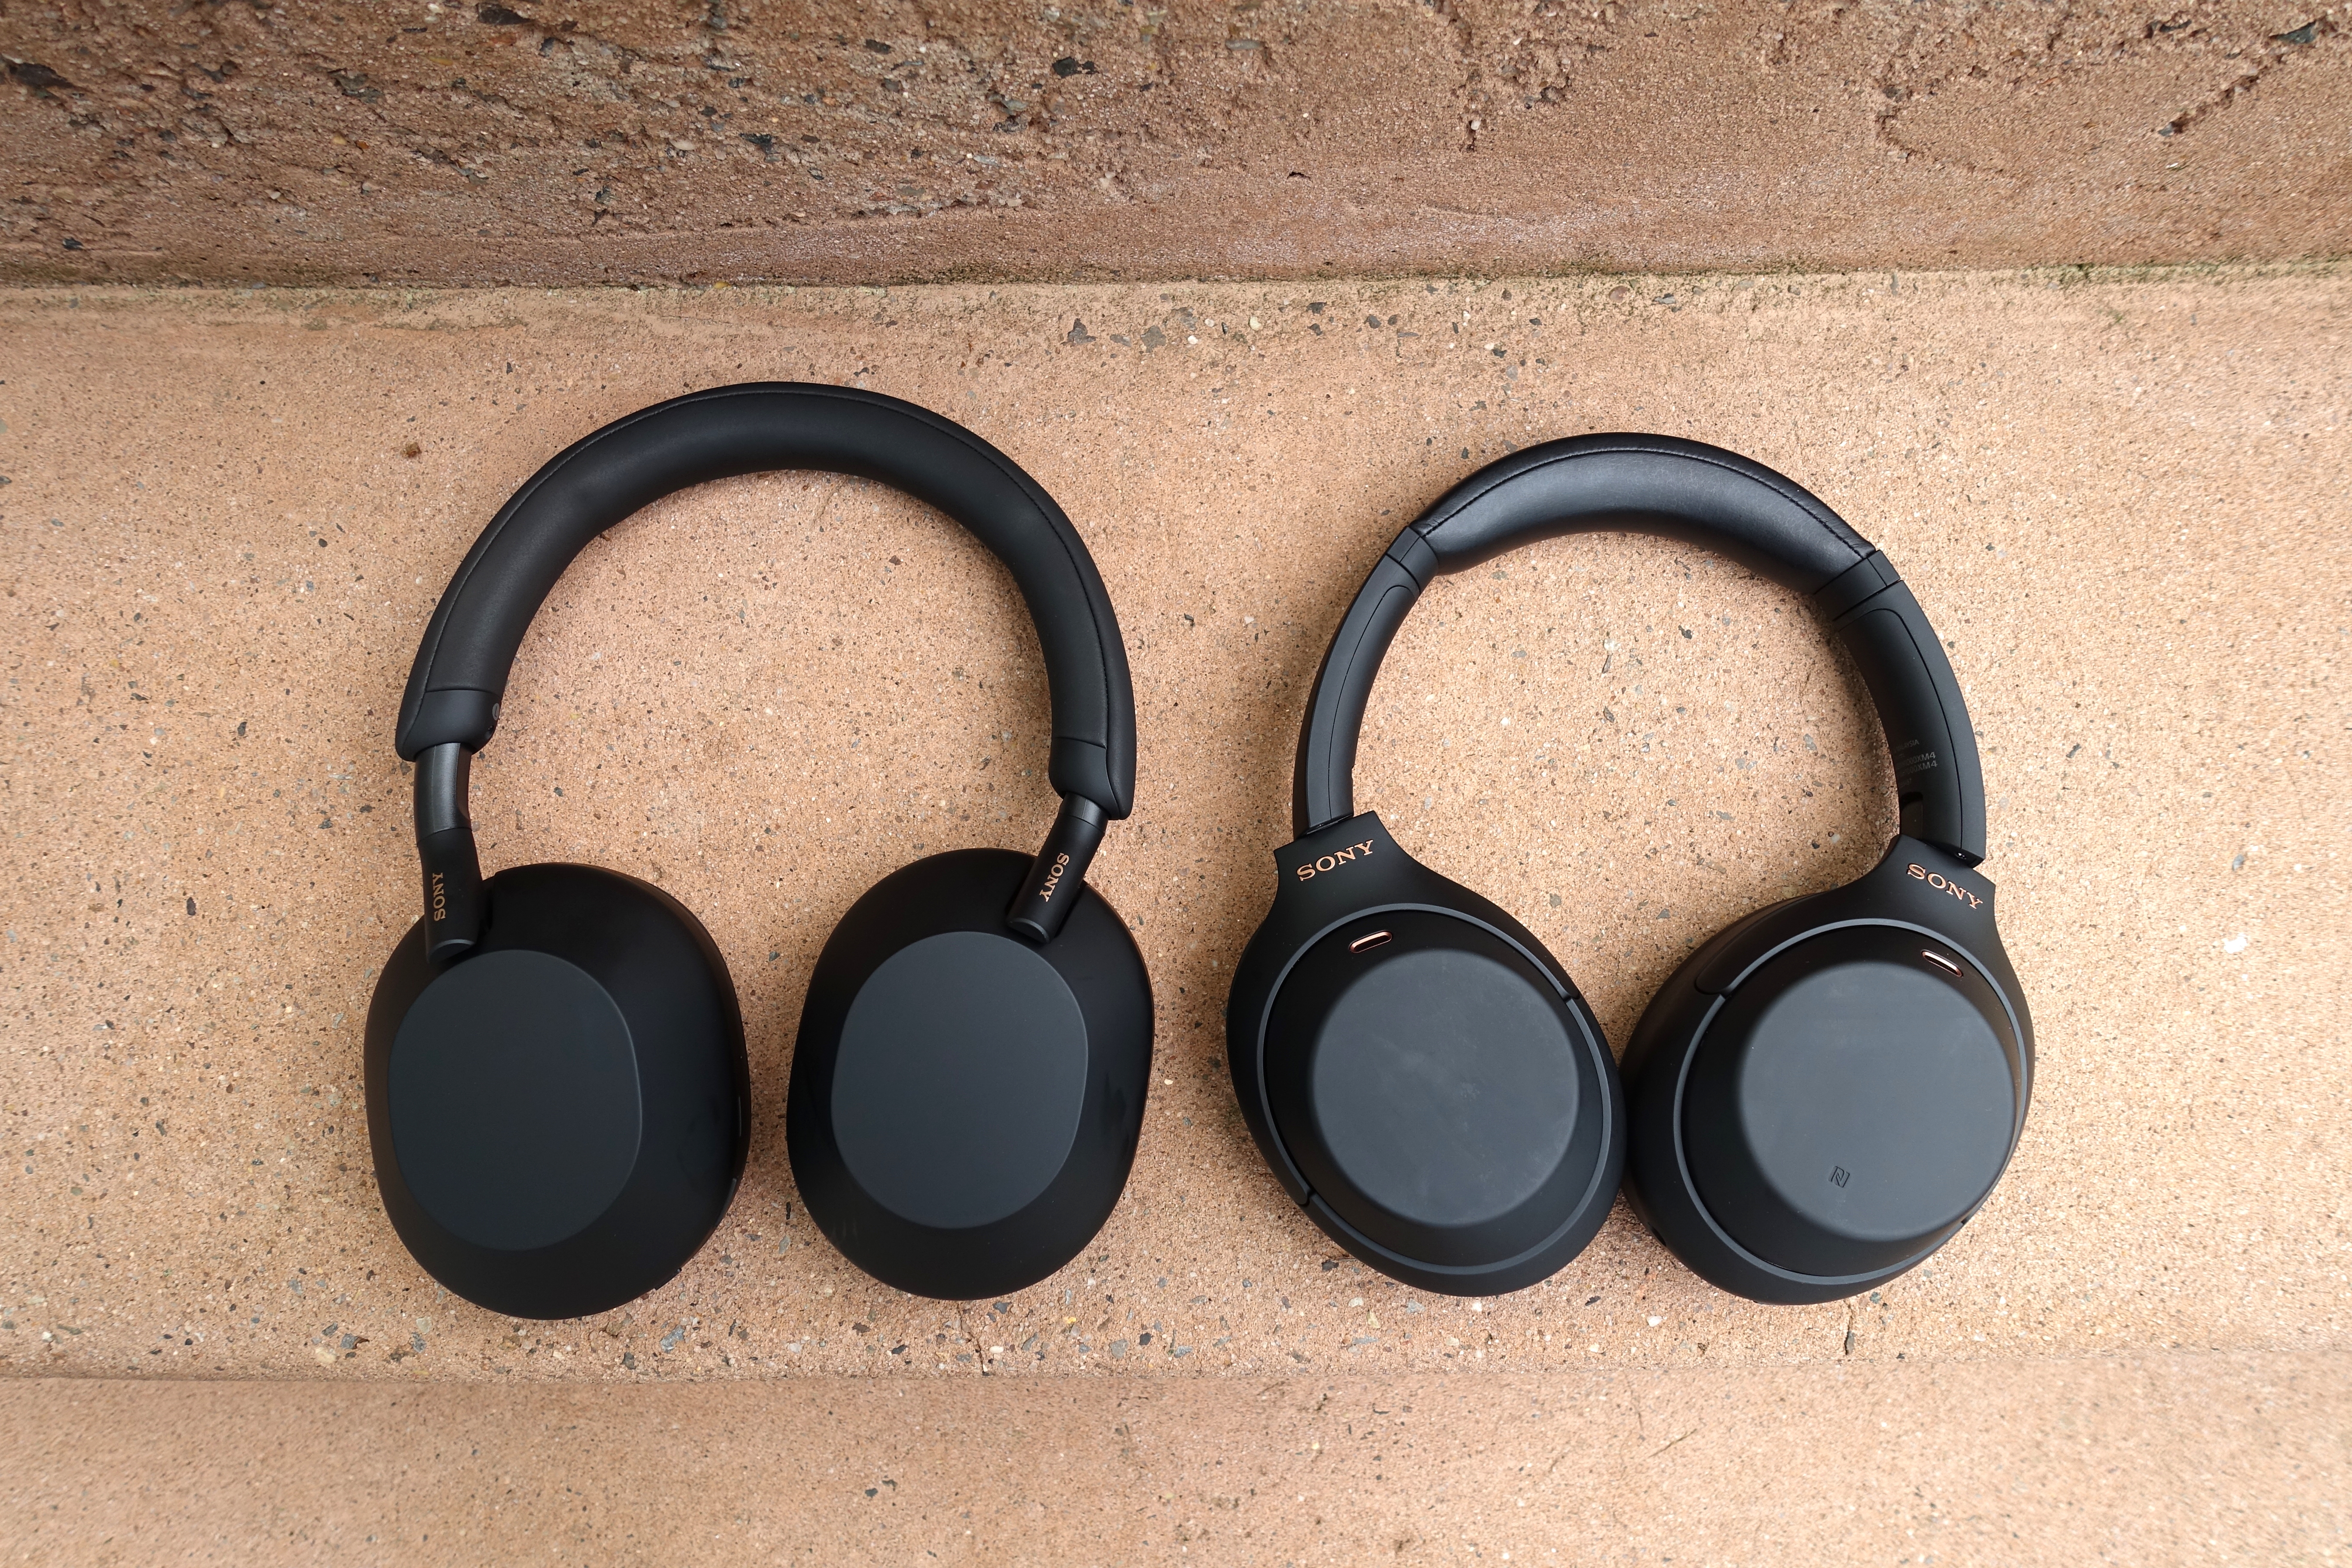 Sony's WH-1000XM5 headphones come with a new design, $50 price hike